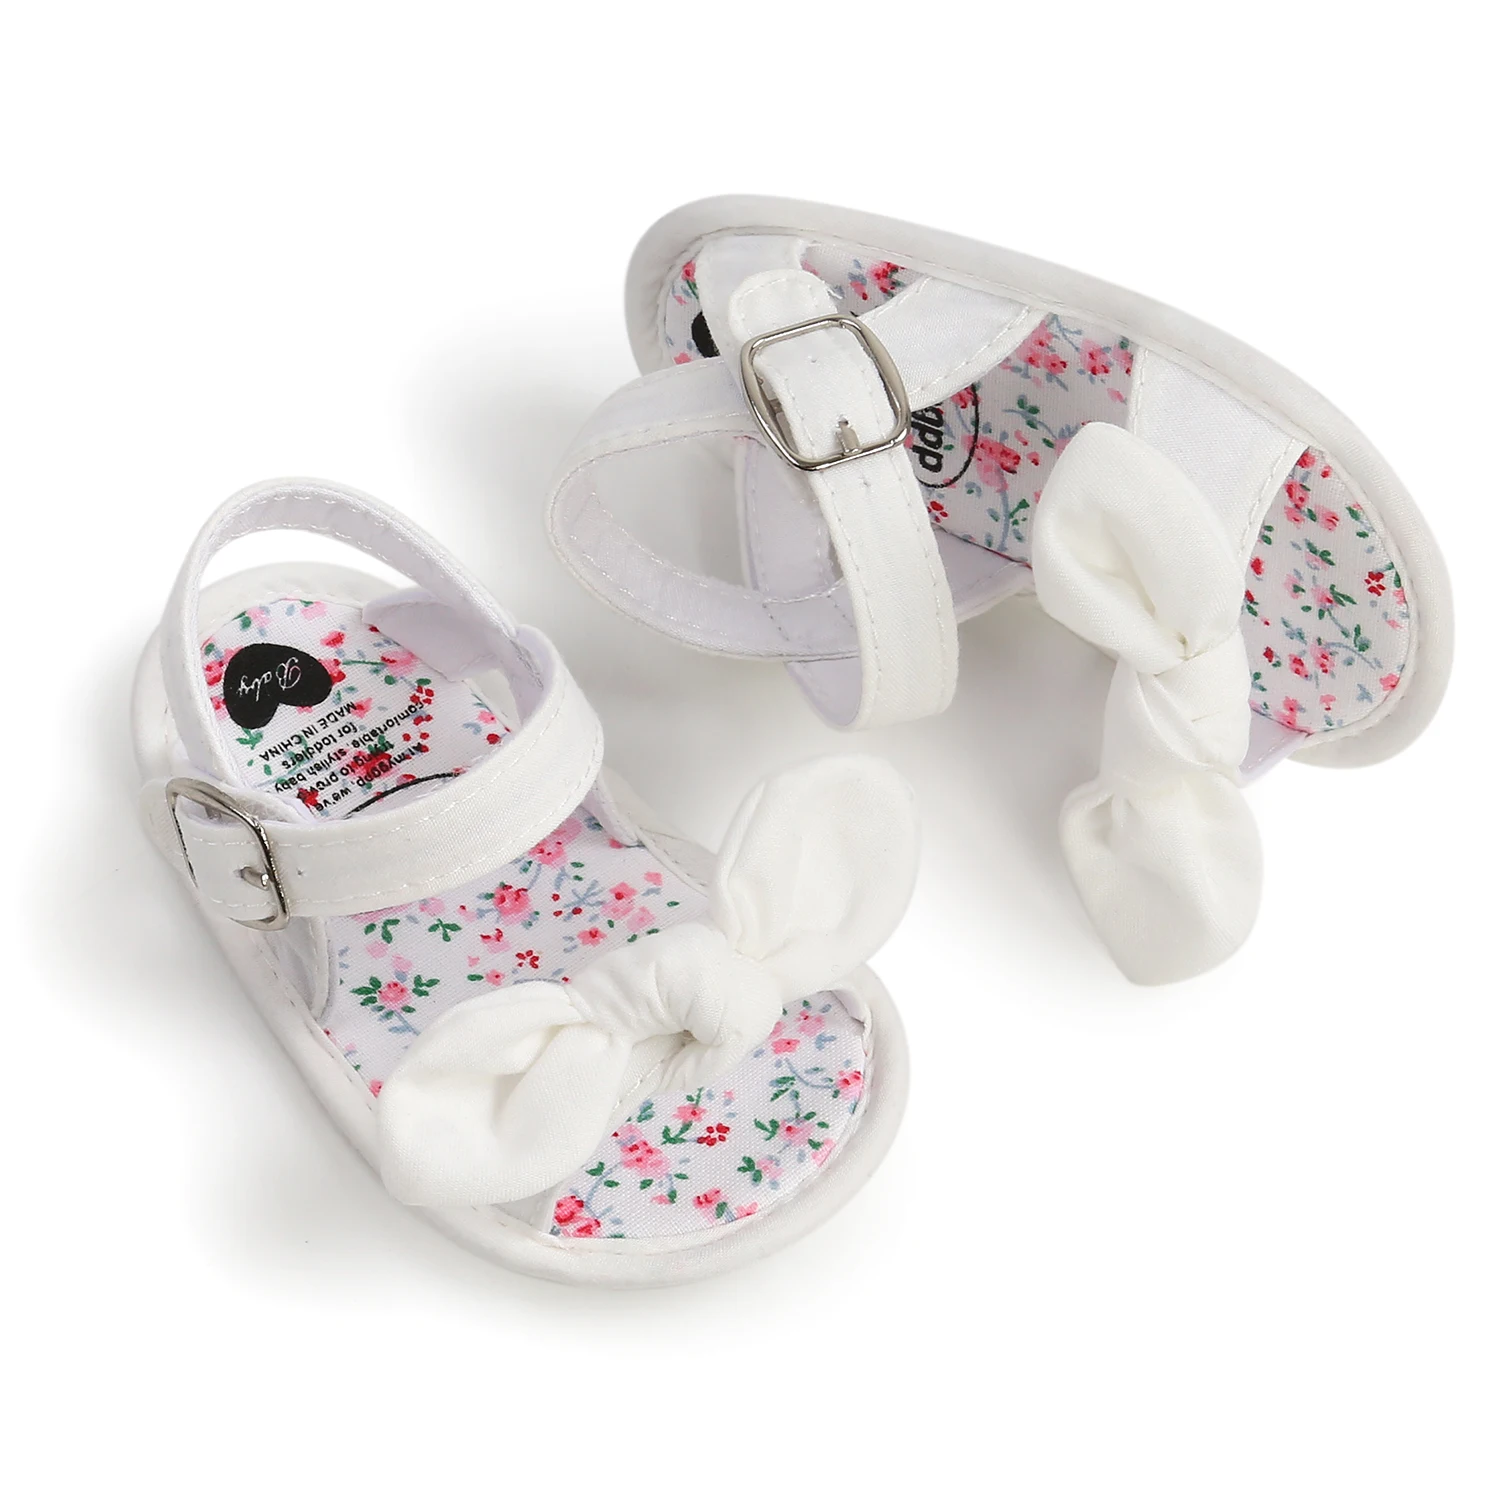 2023 New Bowknot Newborn Baby Princess Shoes Cotton Sole Light Weight Breathable Baby Girl Sandals